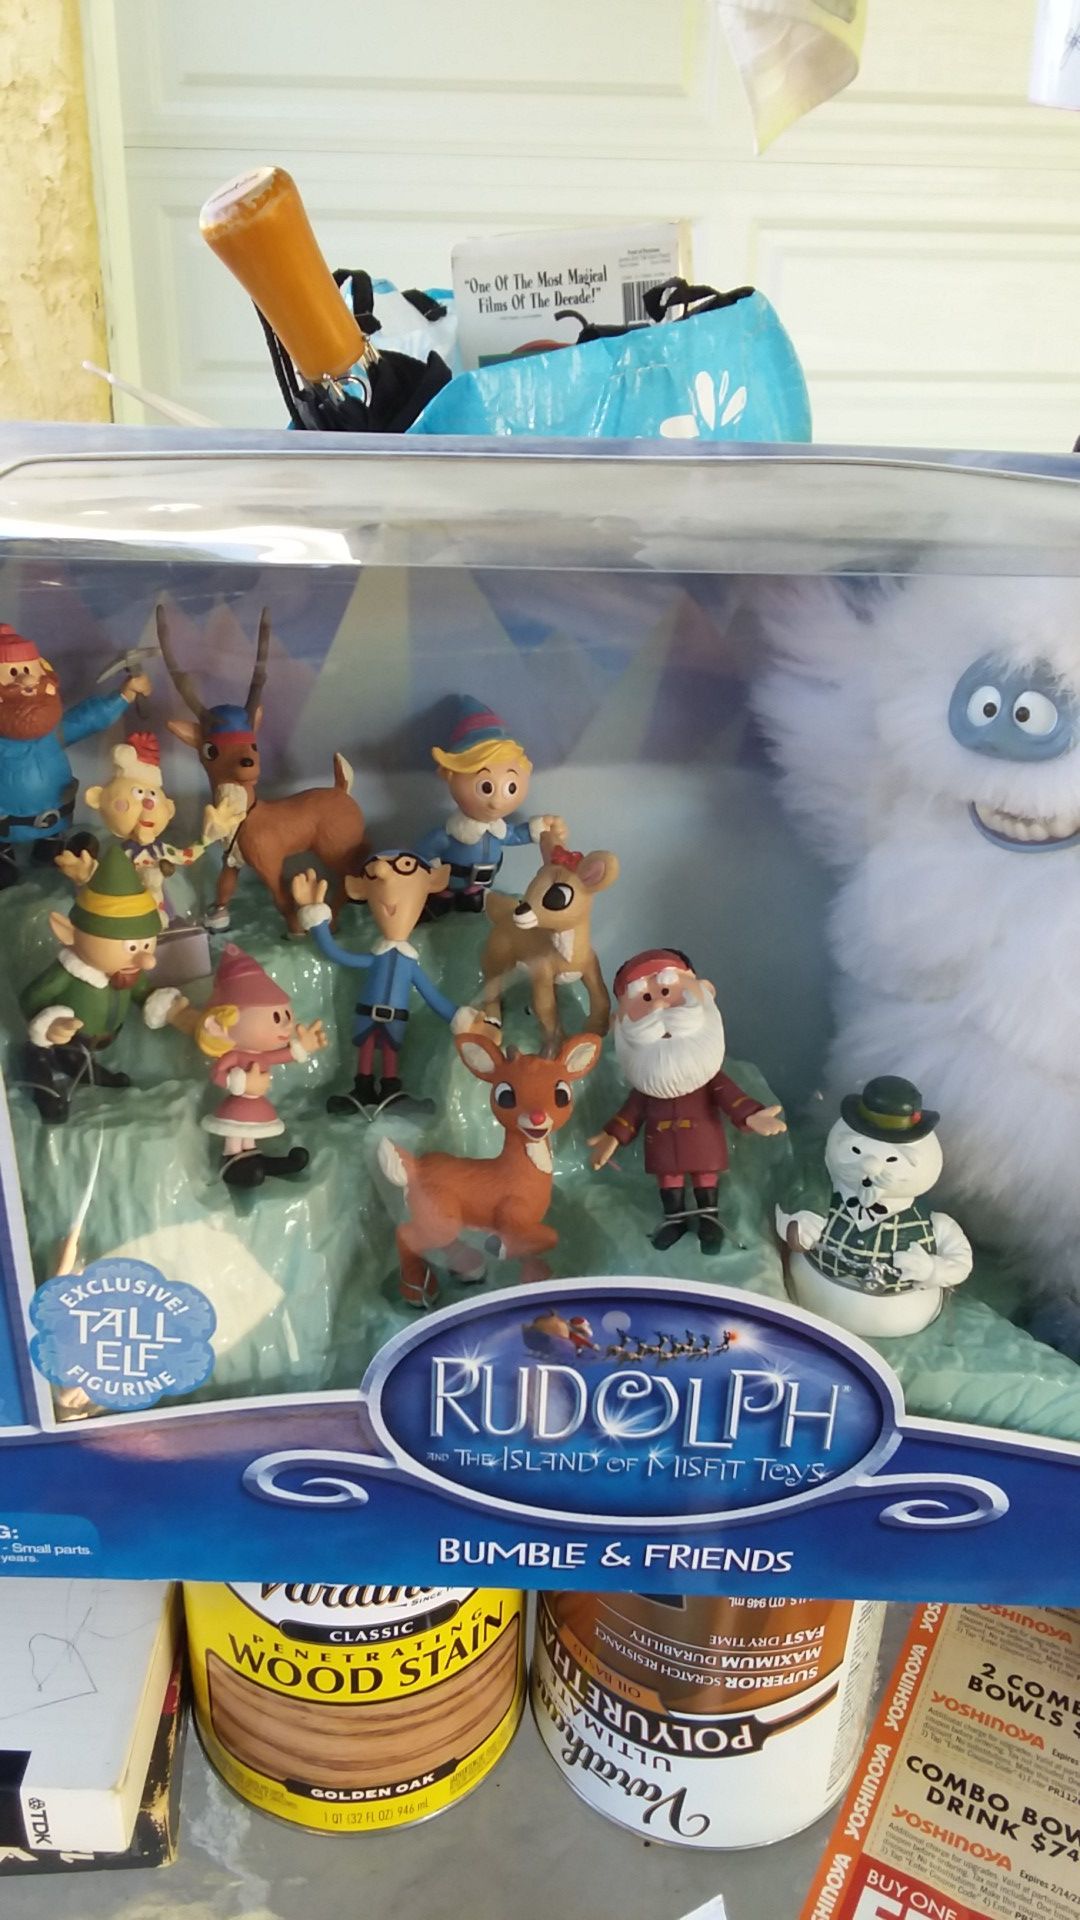 Rudolph the island of misfit toys